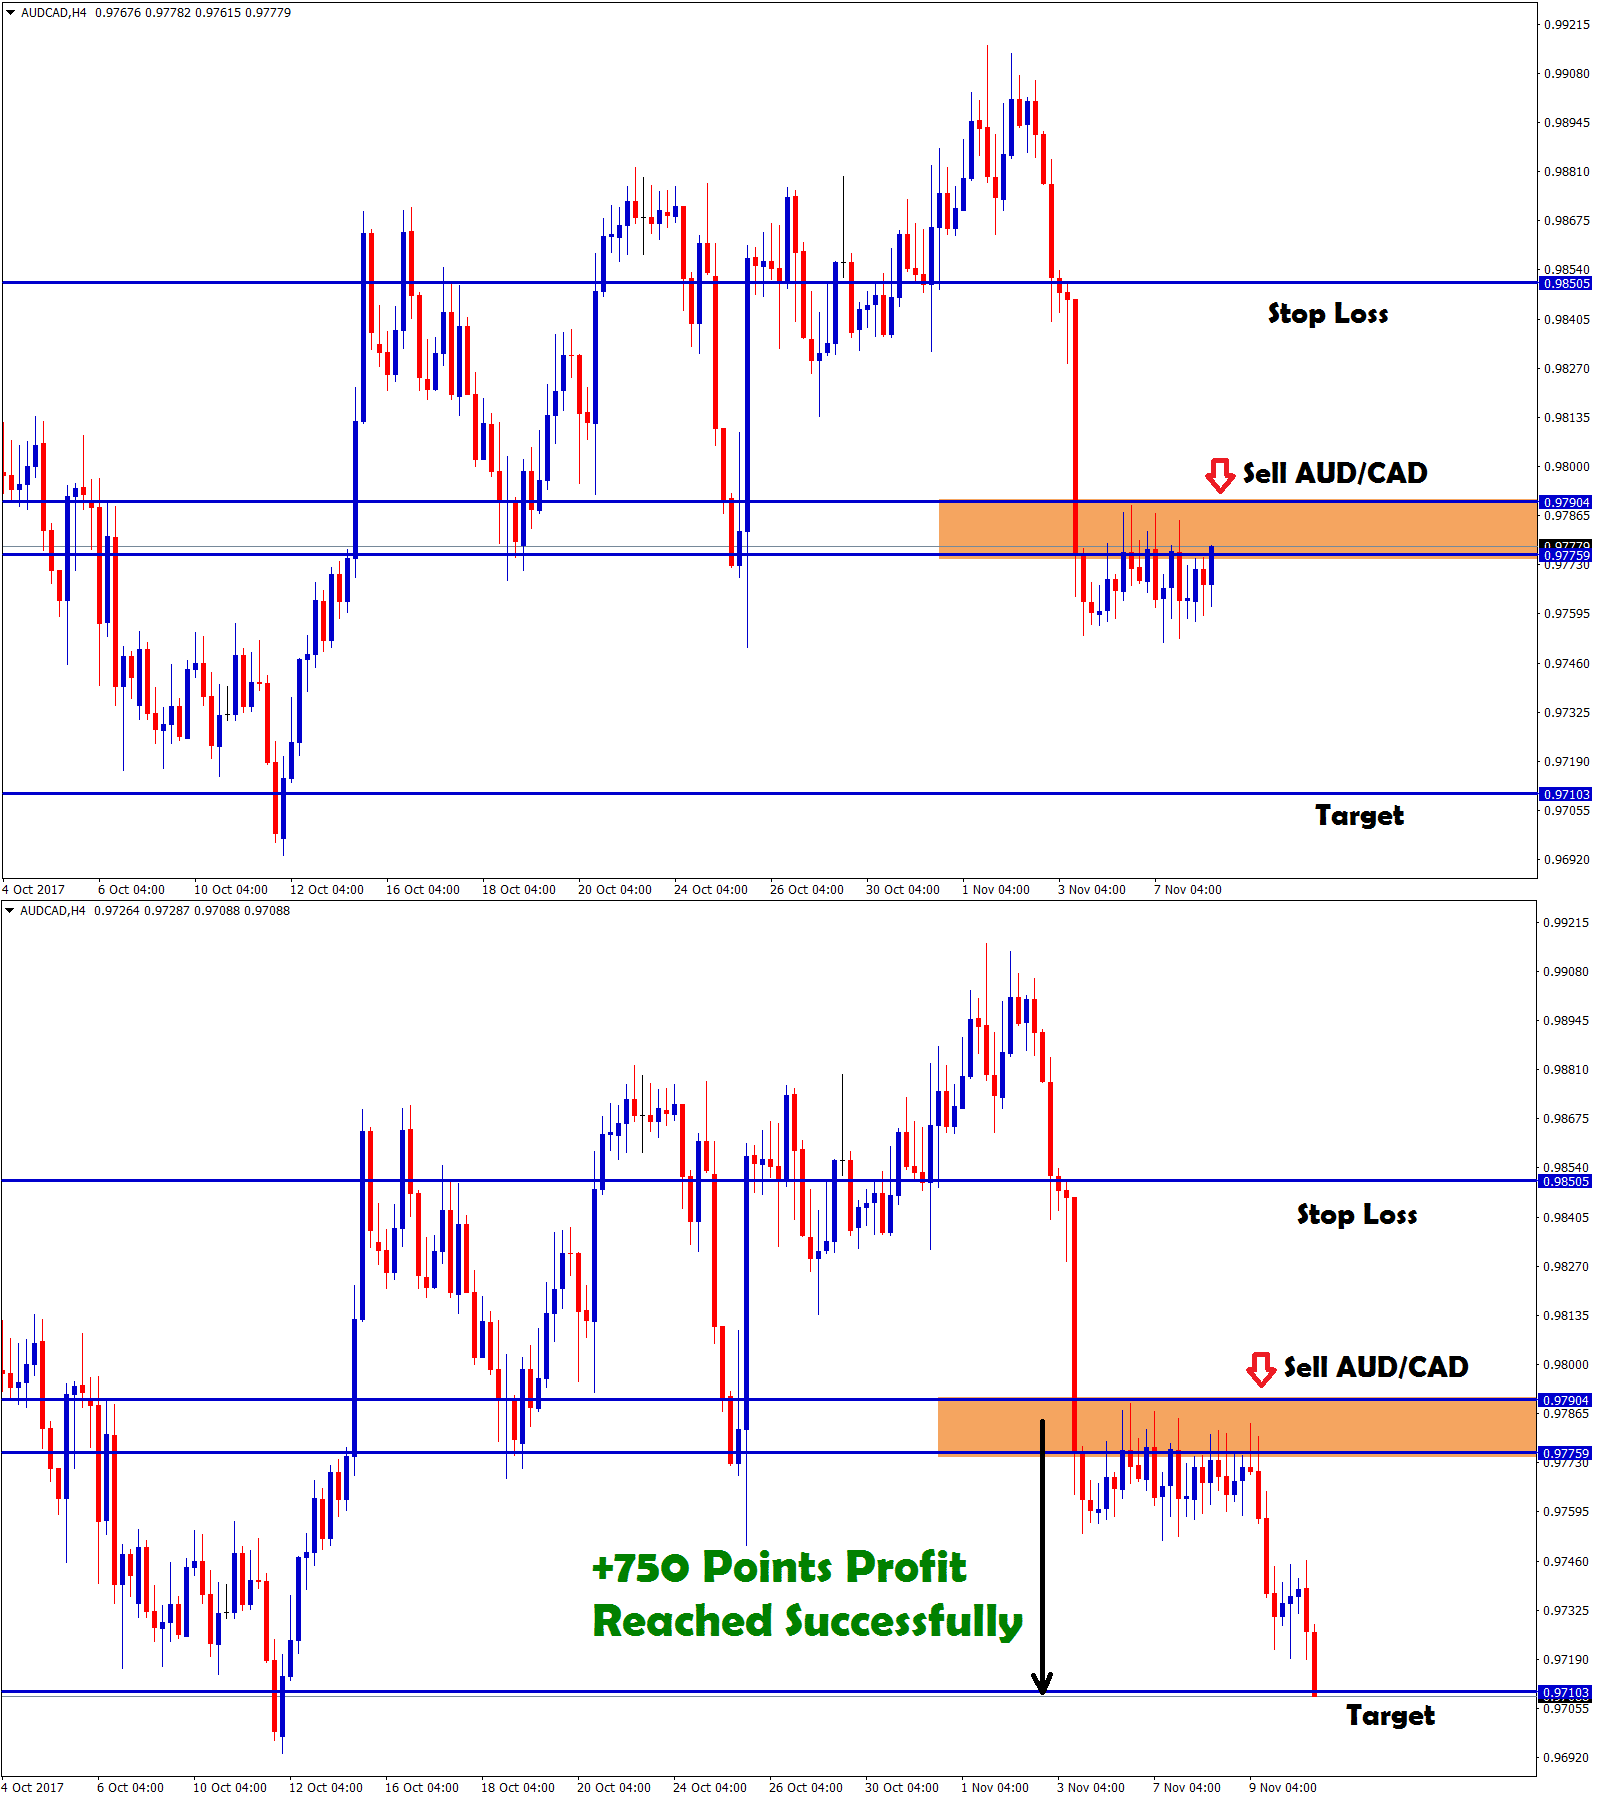 AUDCAD strategy for sell reached 750 points profit